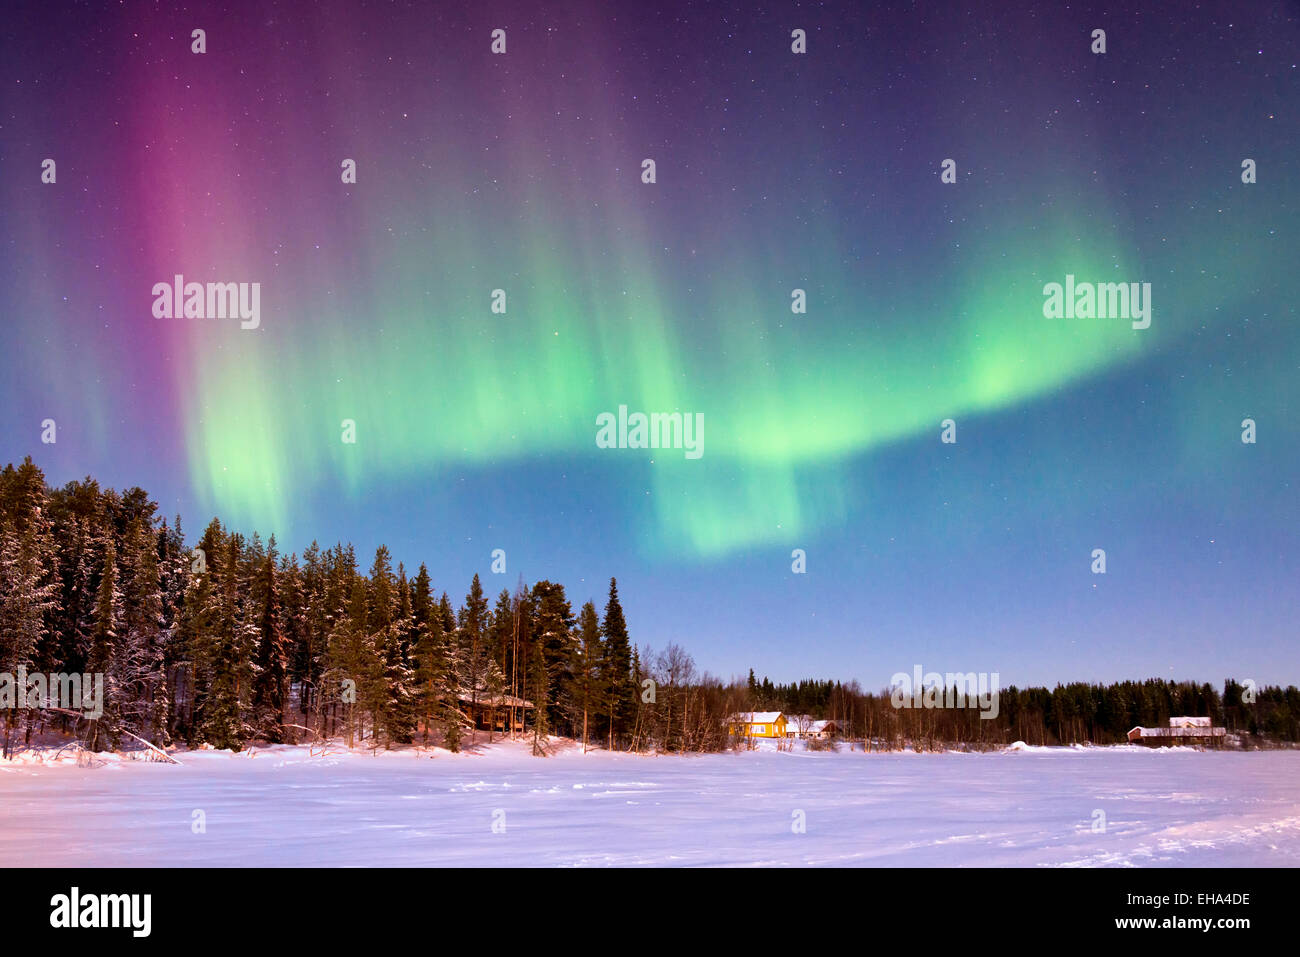 The aurora borealis or Northern Lights in the night sky over a frozen lake  at Levi Lapland Finland Stock Photo - Alamy